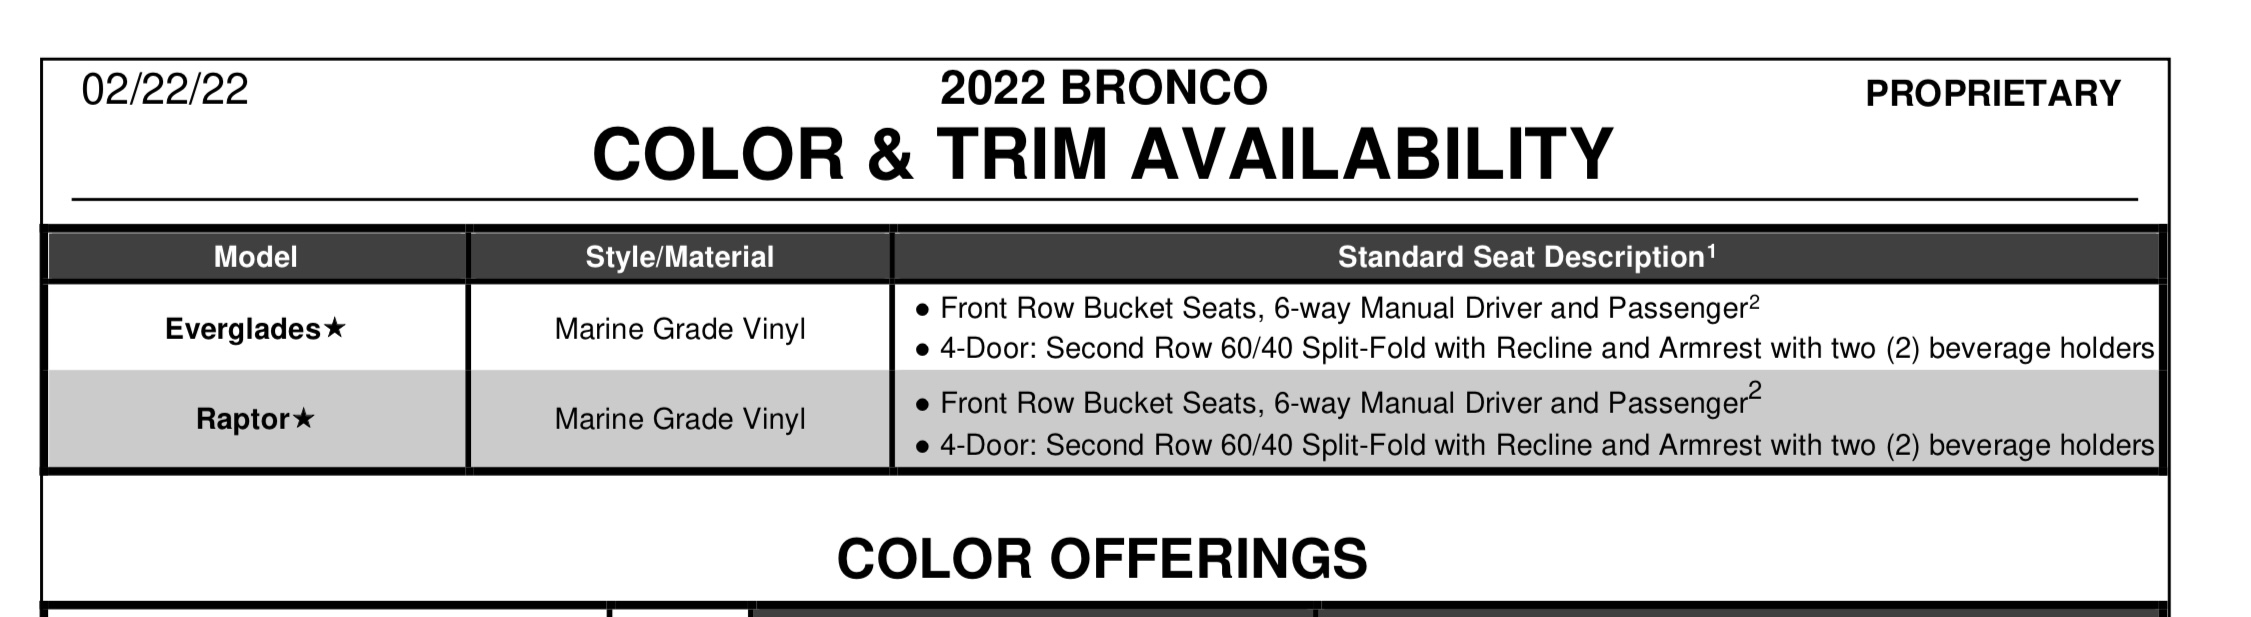 Ford Bronco 📒 Latest 2022 Bronco Order Guide Released (Updated Monthly) + Price List 450EF523-1F89-4F54-93A8-119075B00340